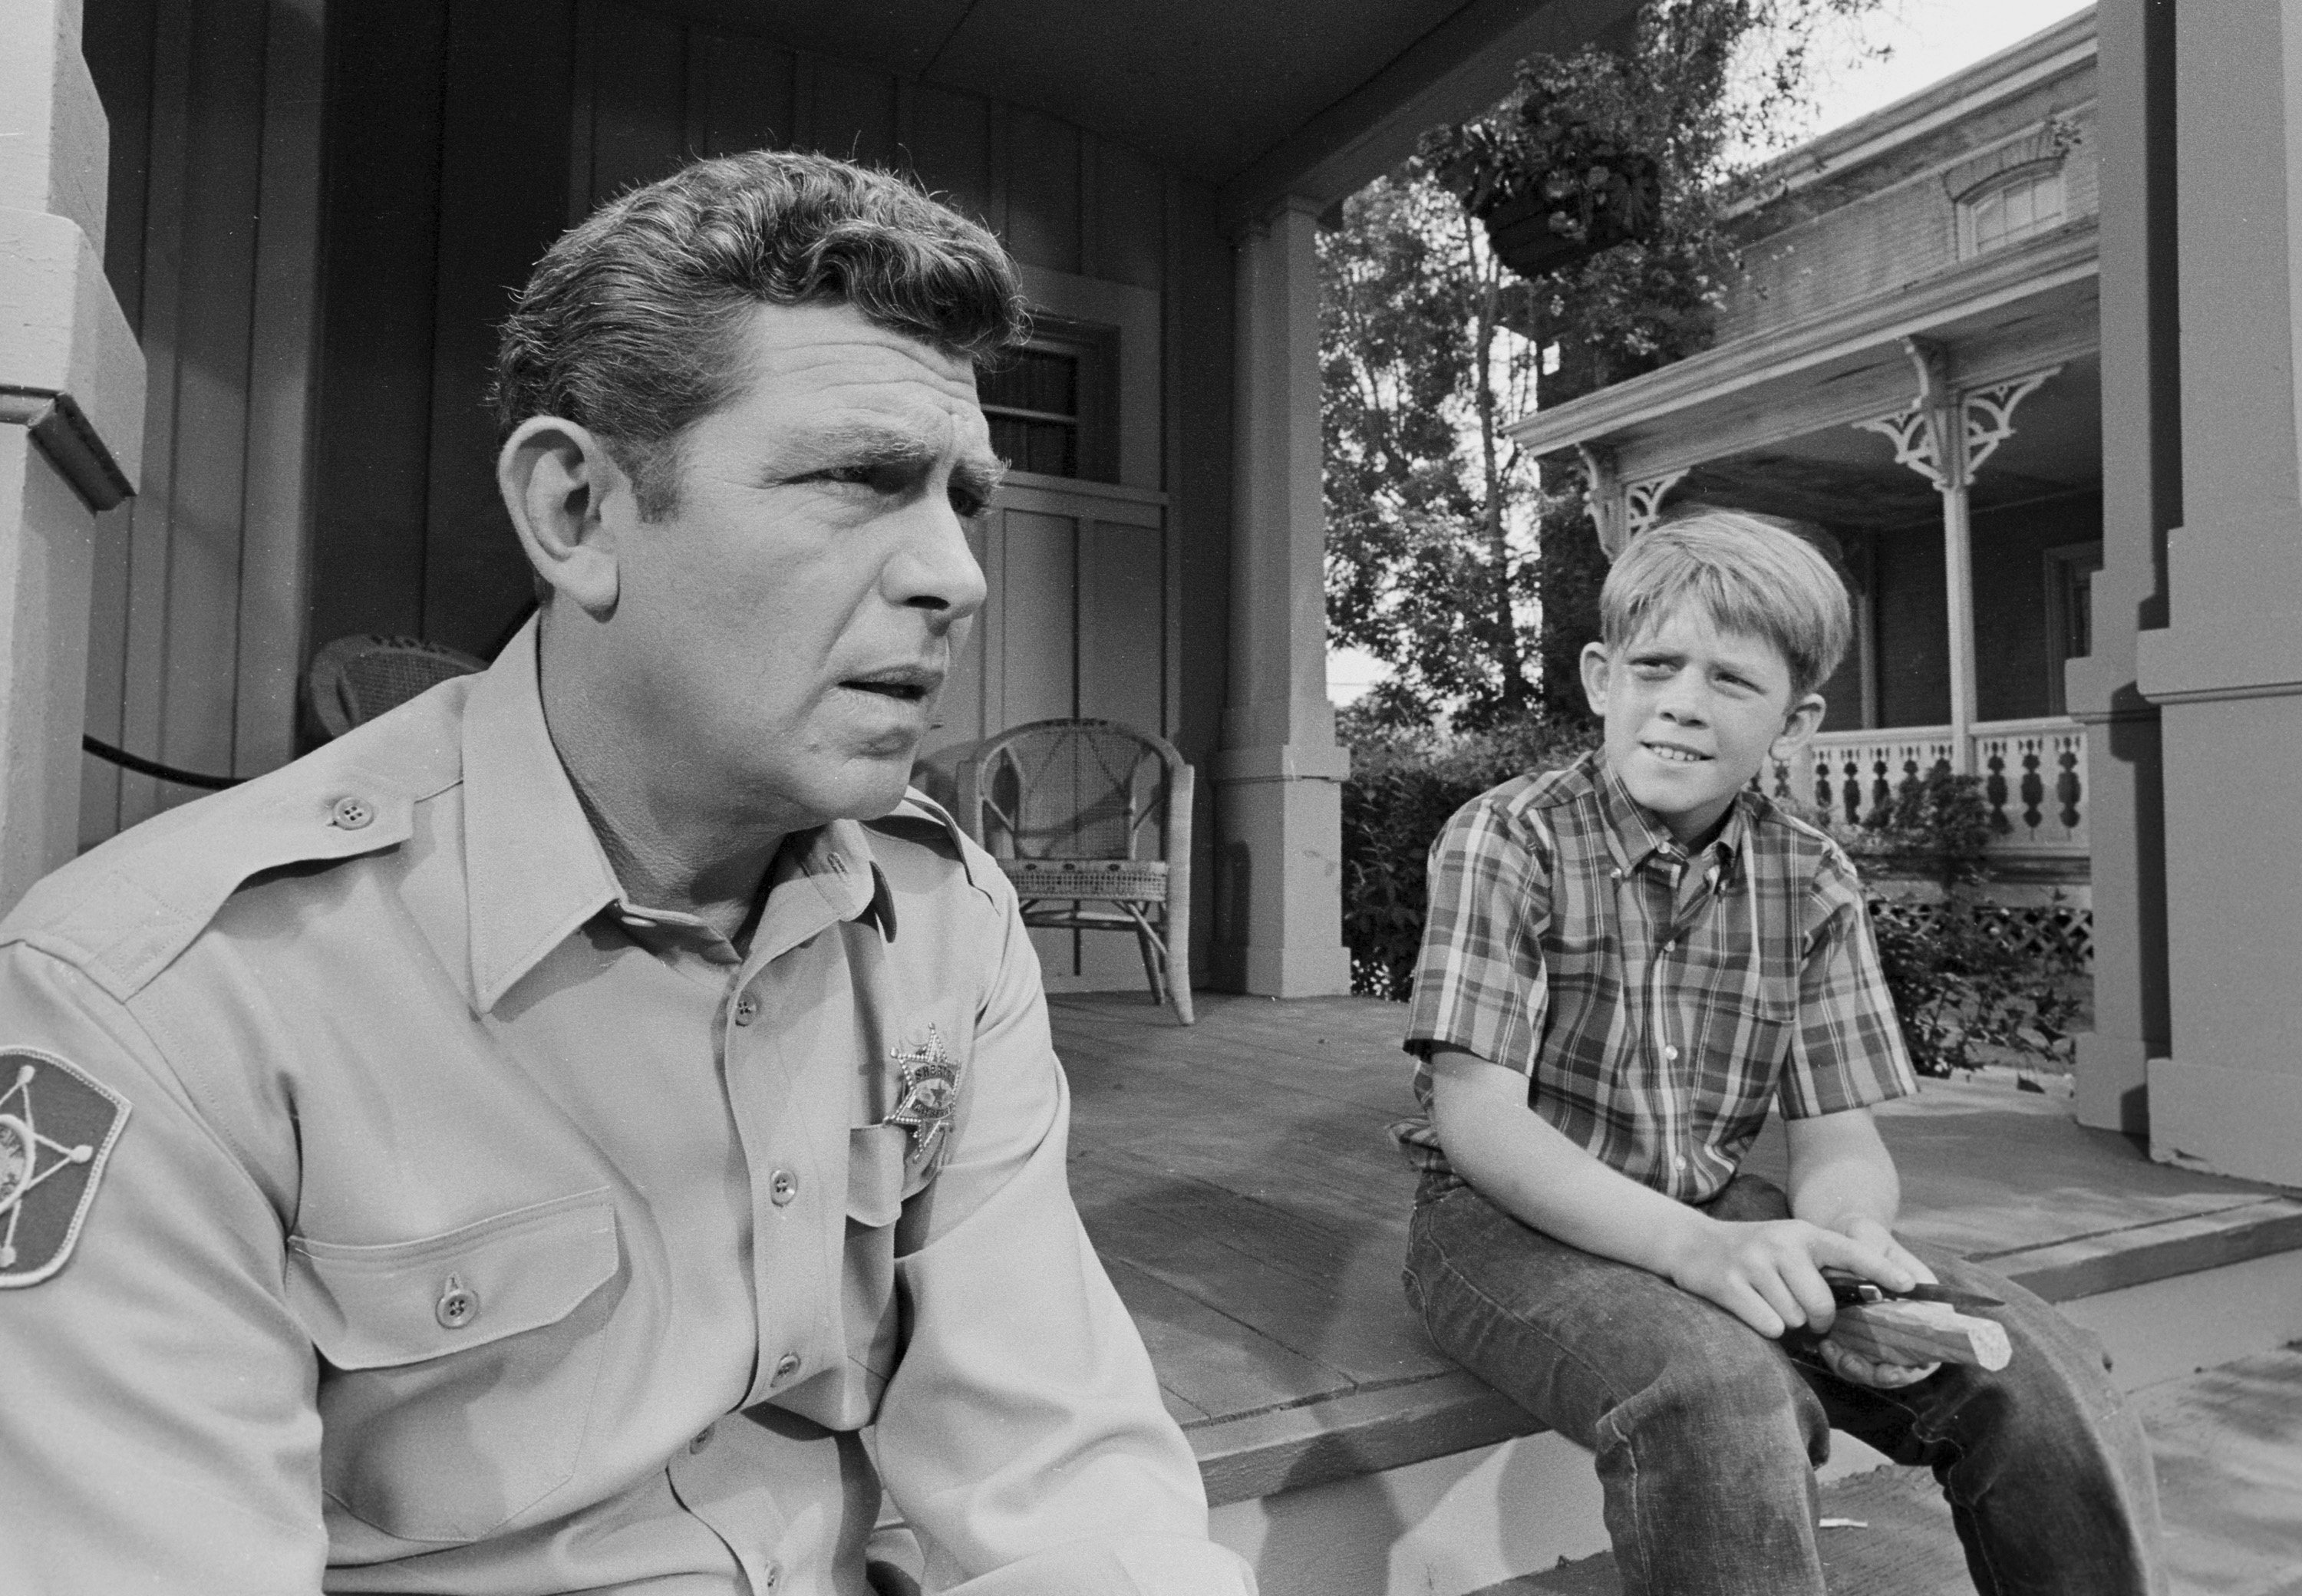 (L to R): Andy Griffith and Ron Howard in a scene from 'The Andy Griffith Show'